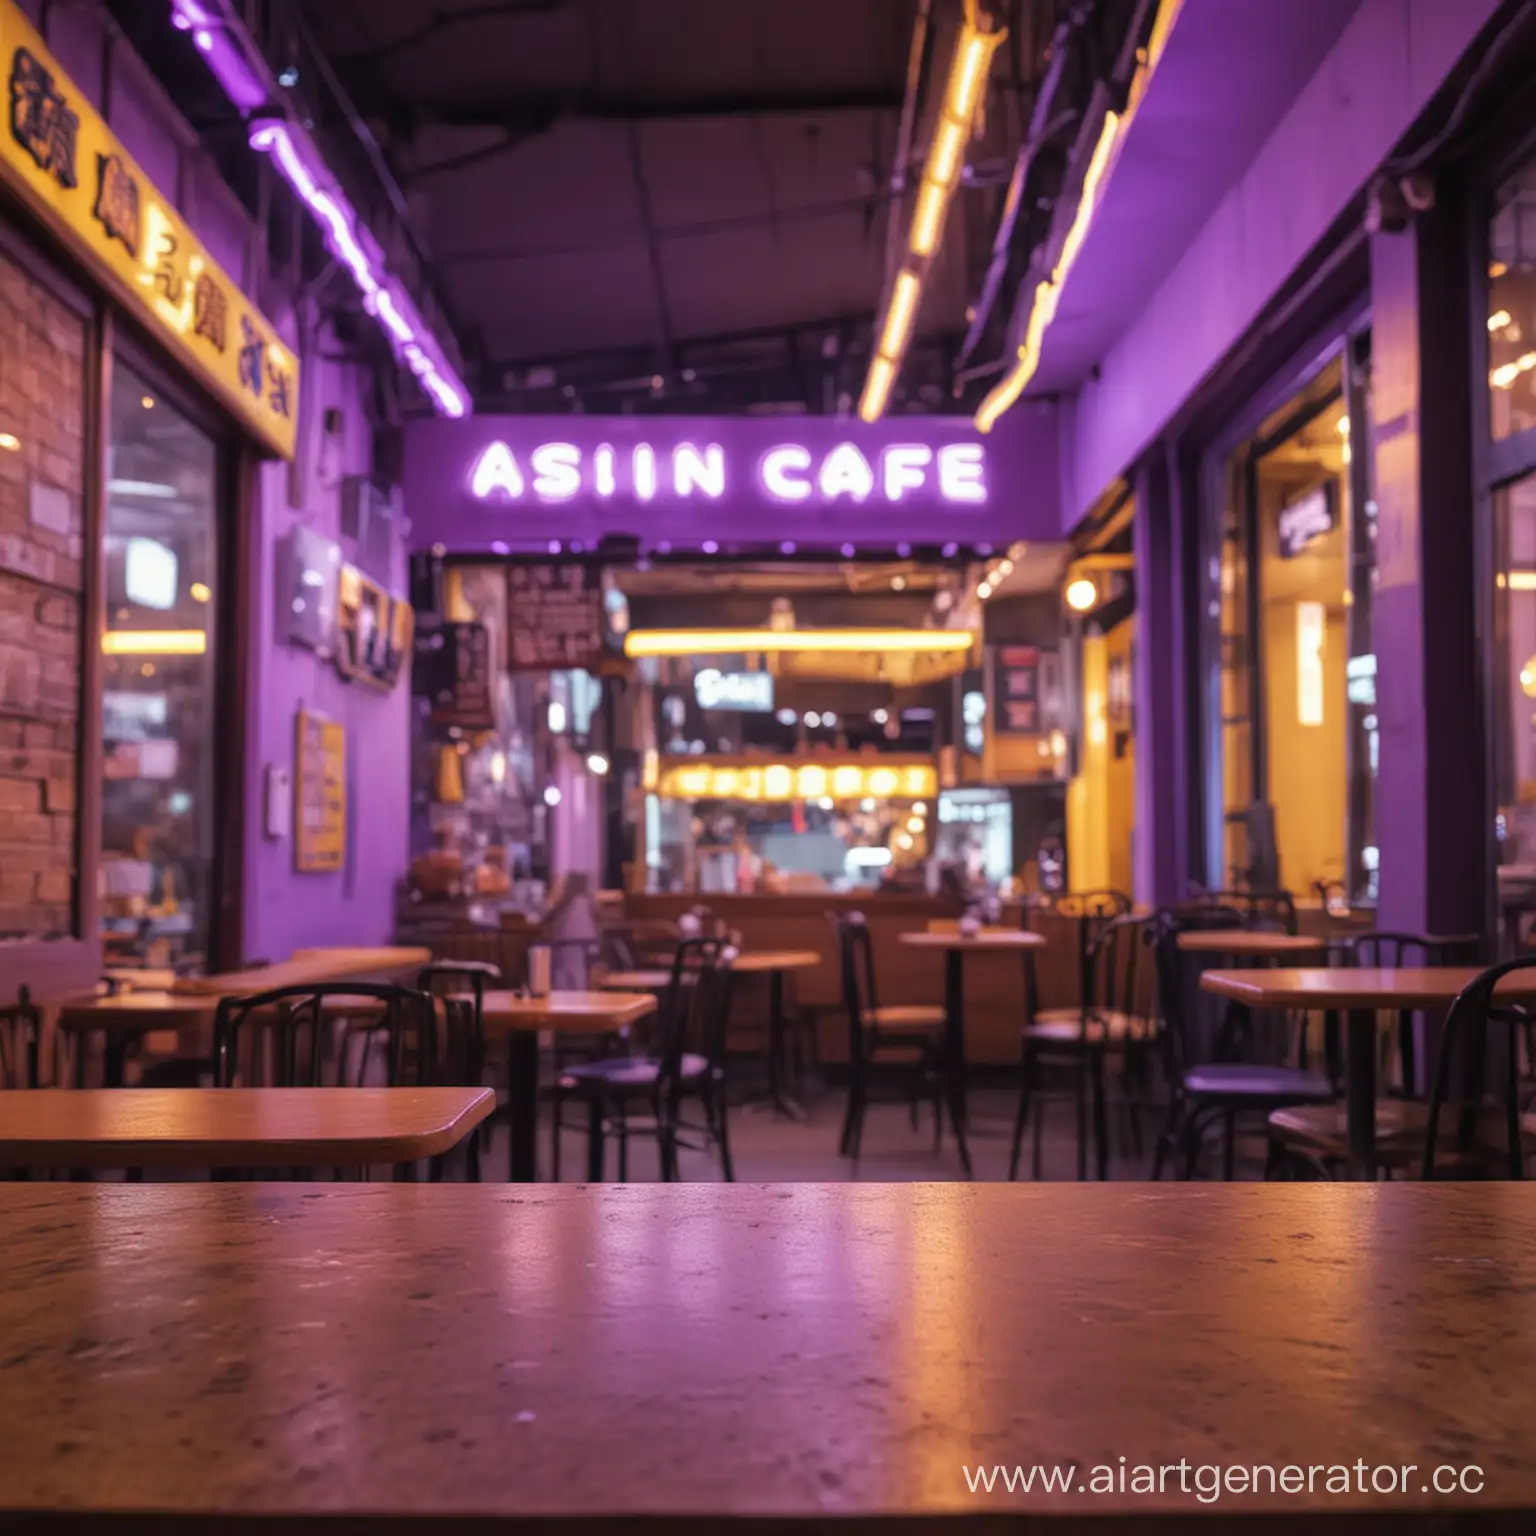 FirstPerson-View-of-Cafe-Dining-Experience-with-Vibrant-Neon-Ambiance